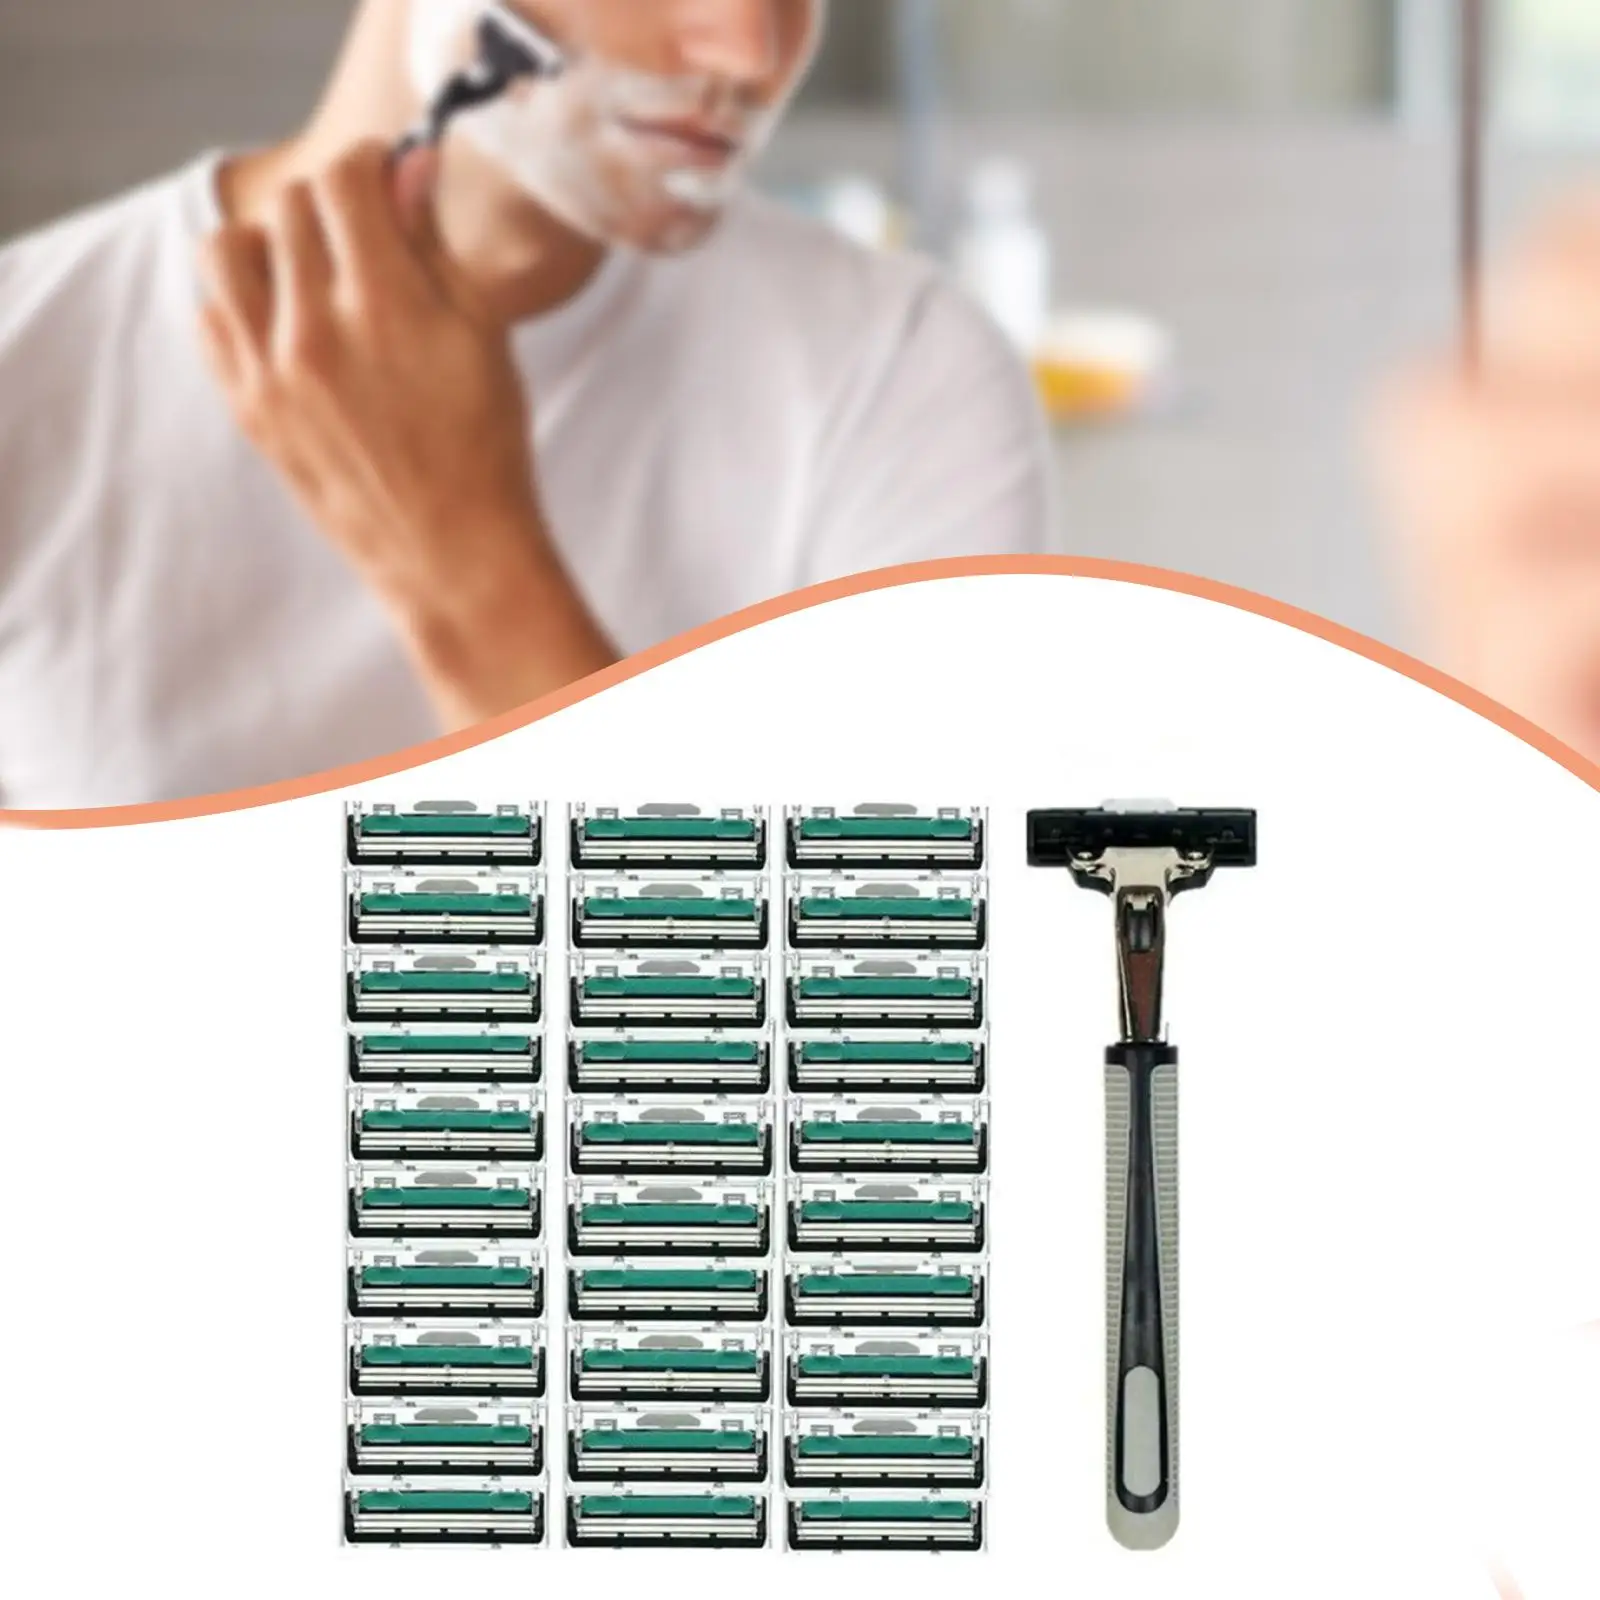 Double Edge Shaver Grooming Hair Remover Trimmer Face Shaving Nonslip Handle for Home